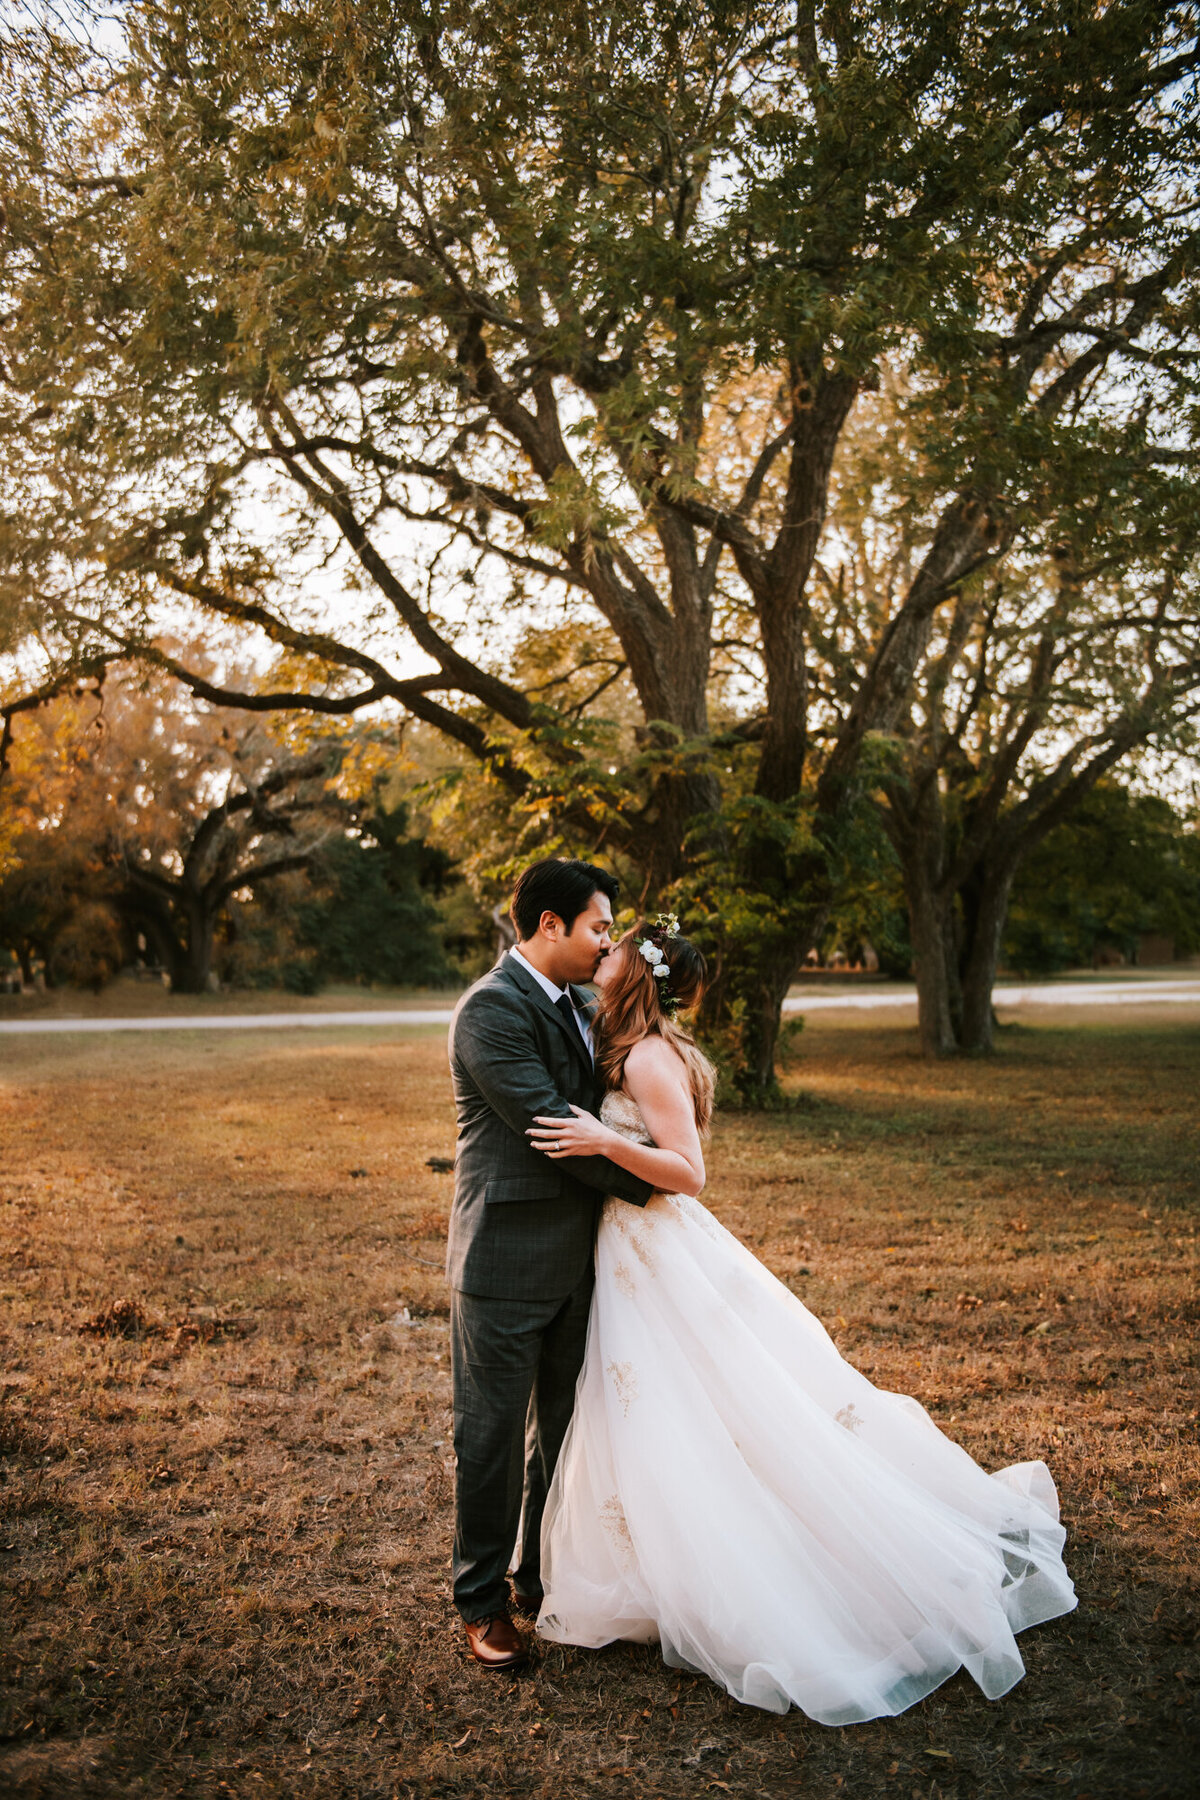 Couples Photography, Man in a blue blazer holding woman in a wedding dress and kissing her in front of large trees.